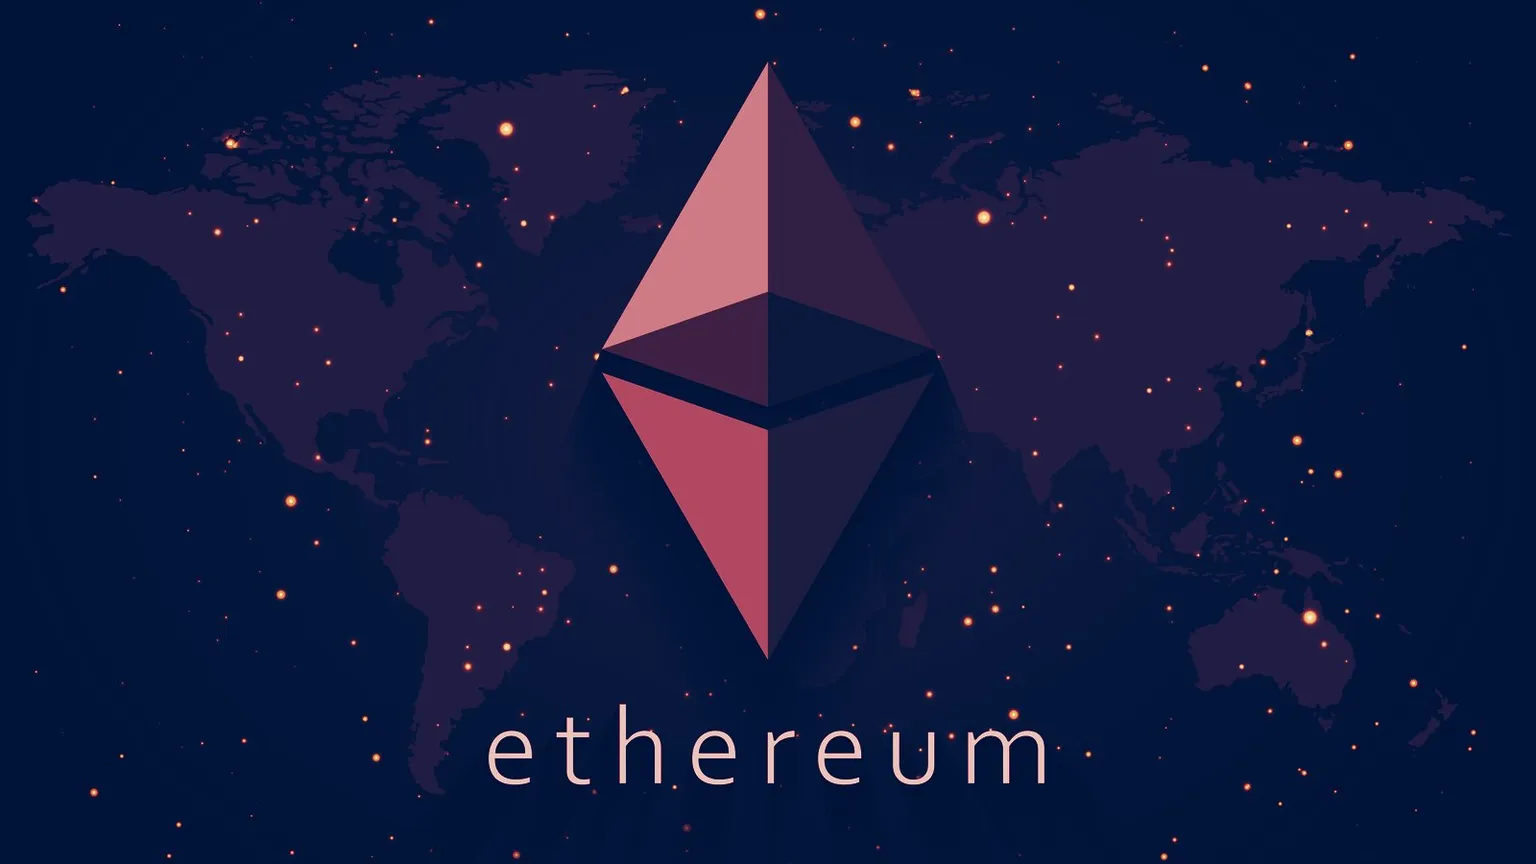 Ethereum 2.0 could be delayed until 2021. Image: Shutterstock